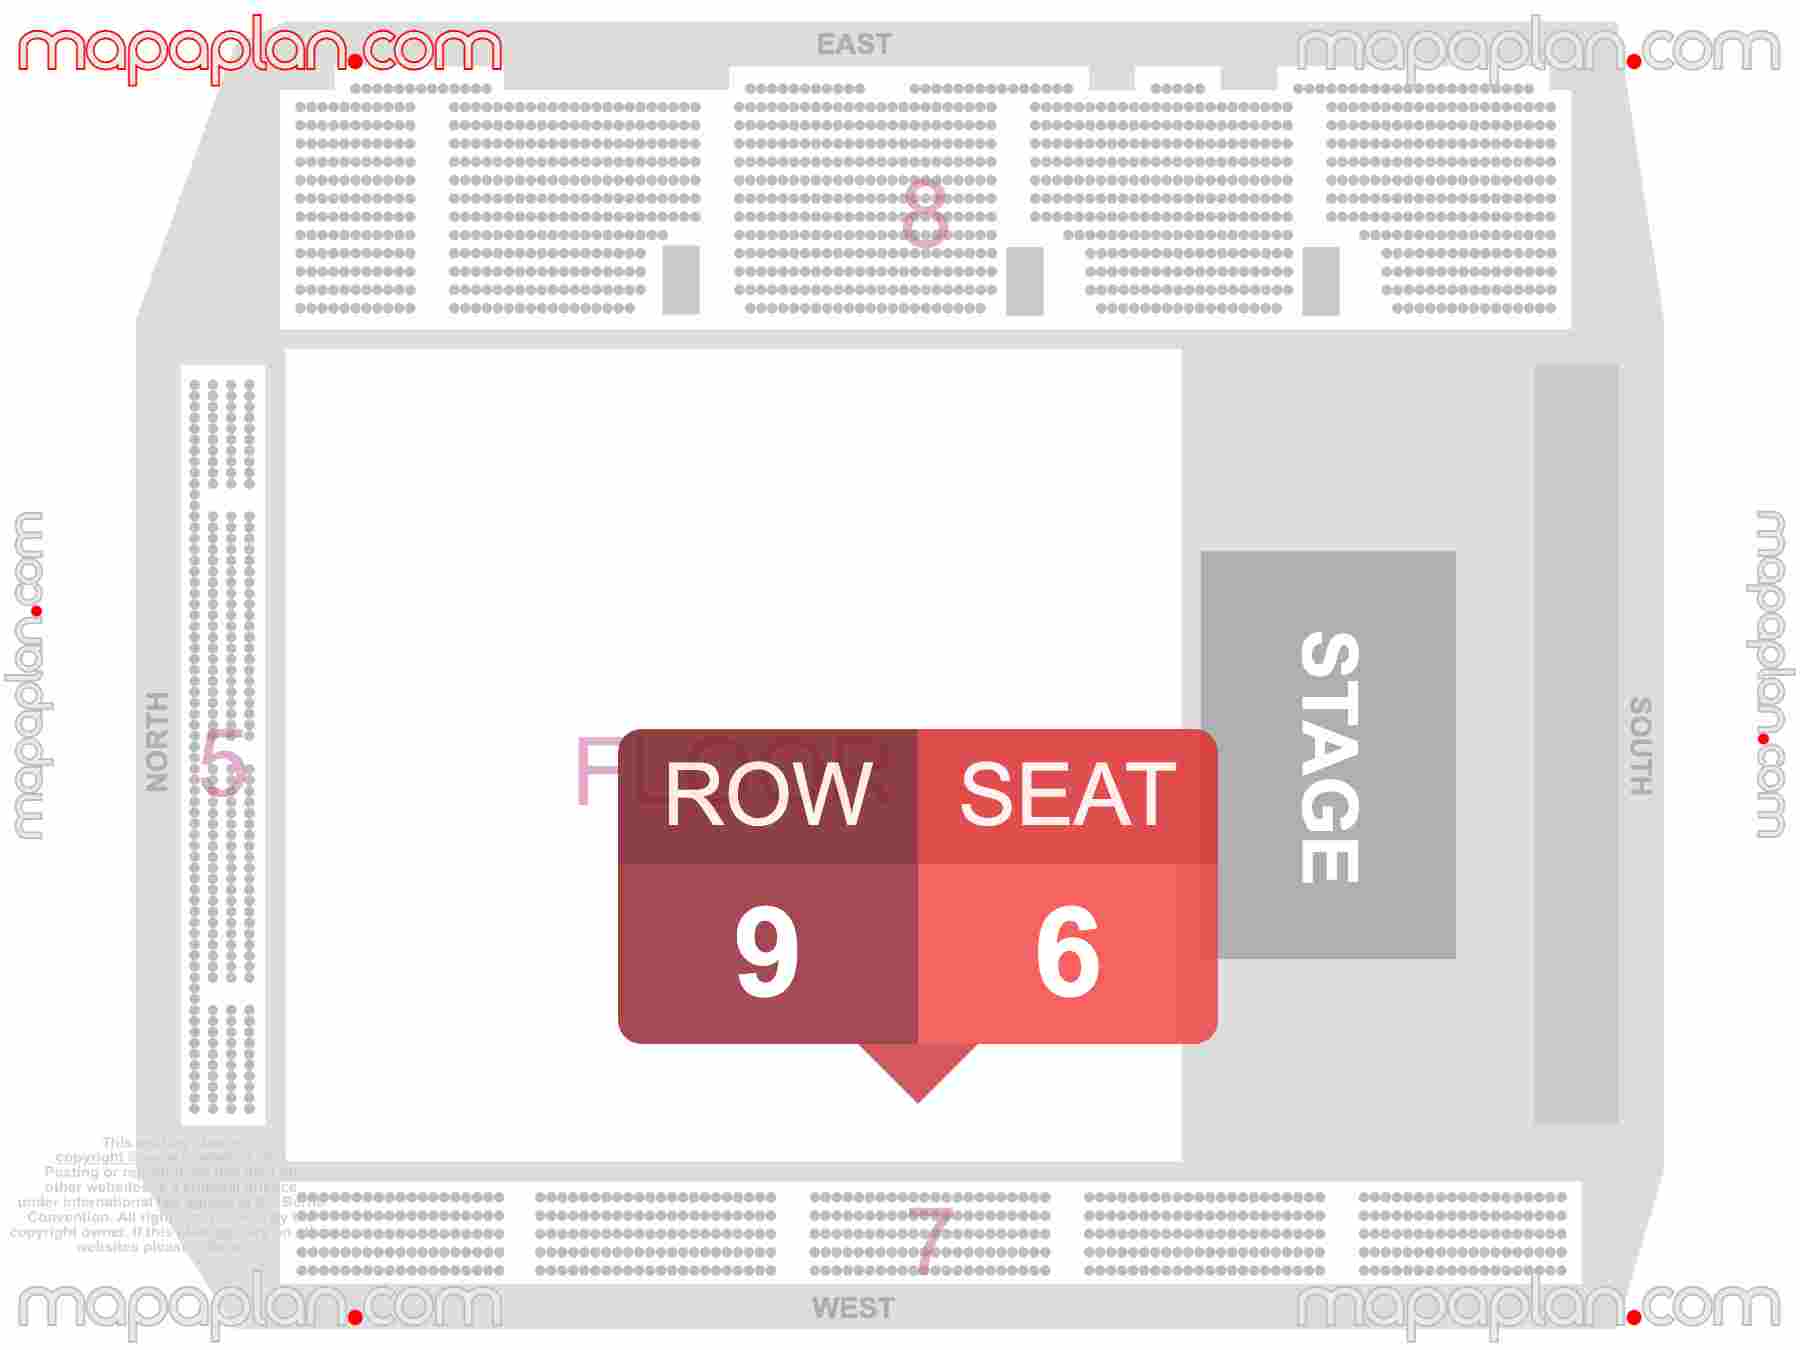 Wellington TSB Arena seating map Concert with floor general admission standing seating map with exact section numbers showing best rows and seats selection 3d layout - Best interactive seat finder tool with precise detailed location data